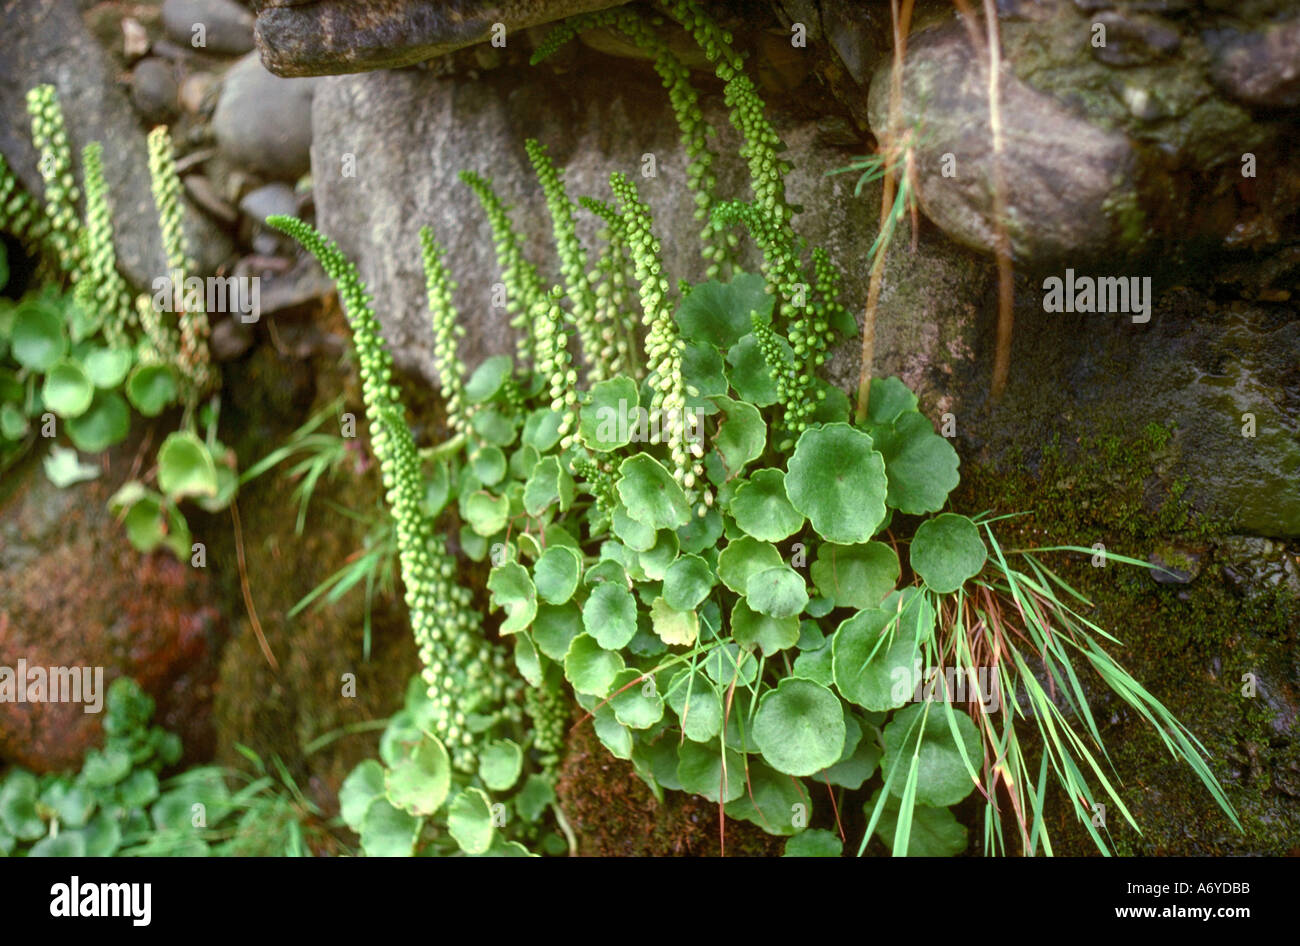 Wall Pennywort, Umbilicus rupestris, Crassulaceae. Aka Navelwort and Penny Pies. Stock Photo